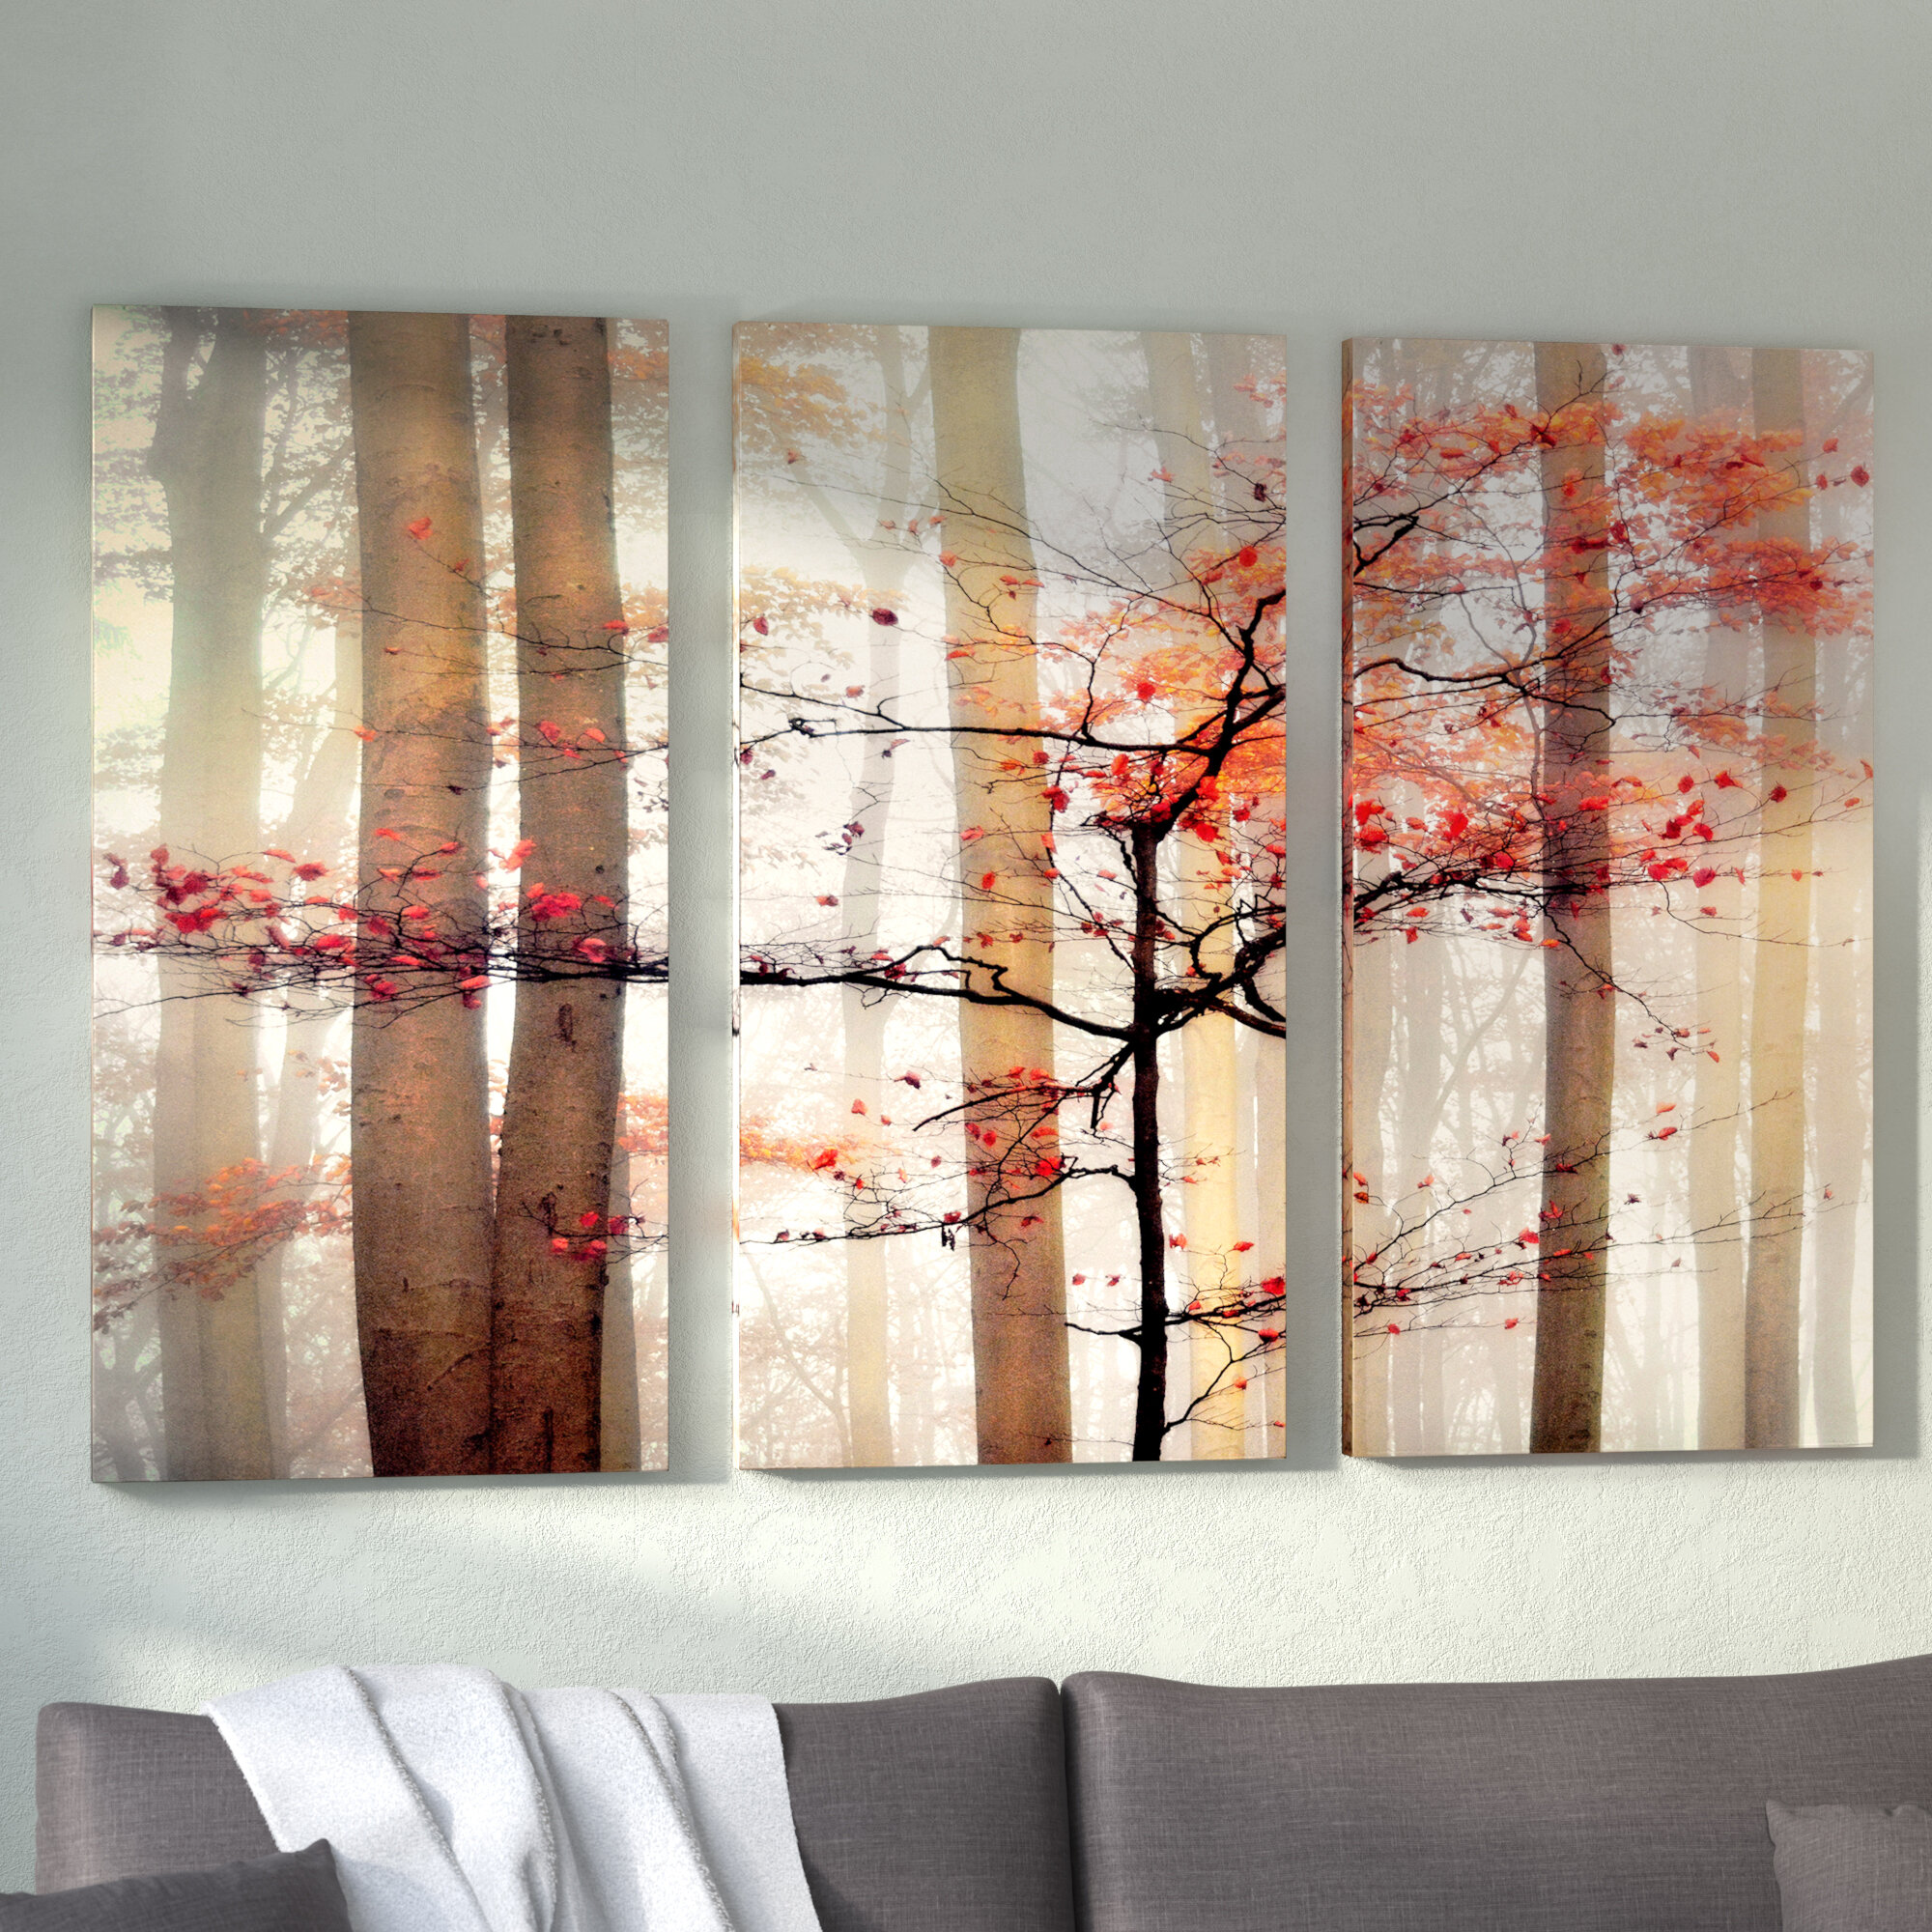 Design Art Light of the Cross 3 Piece Graphic Art on Wrapped Canvas Set 